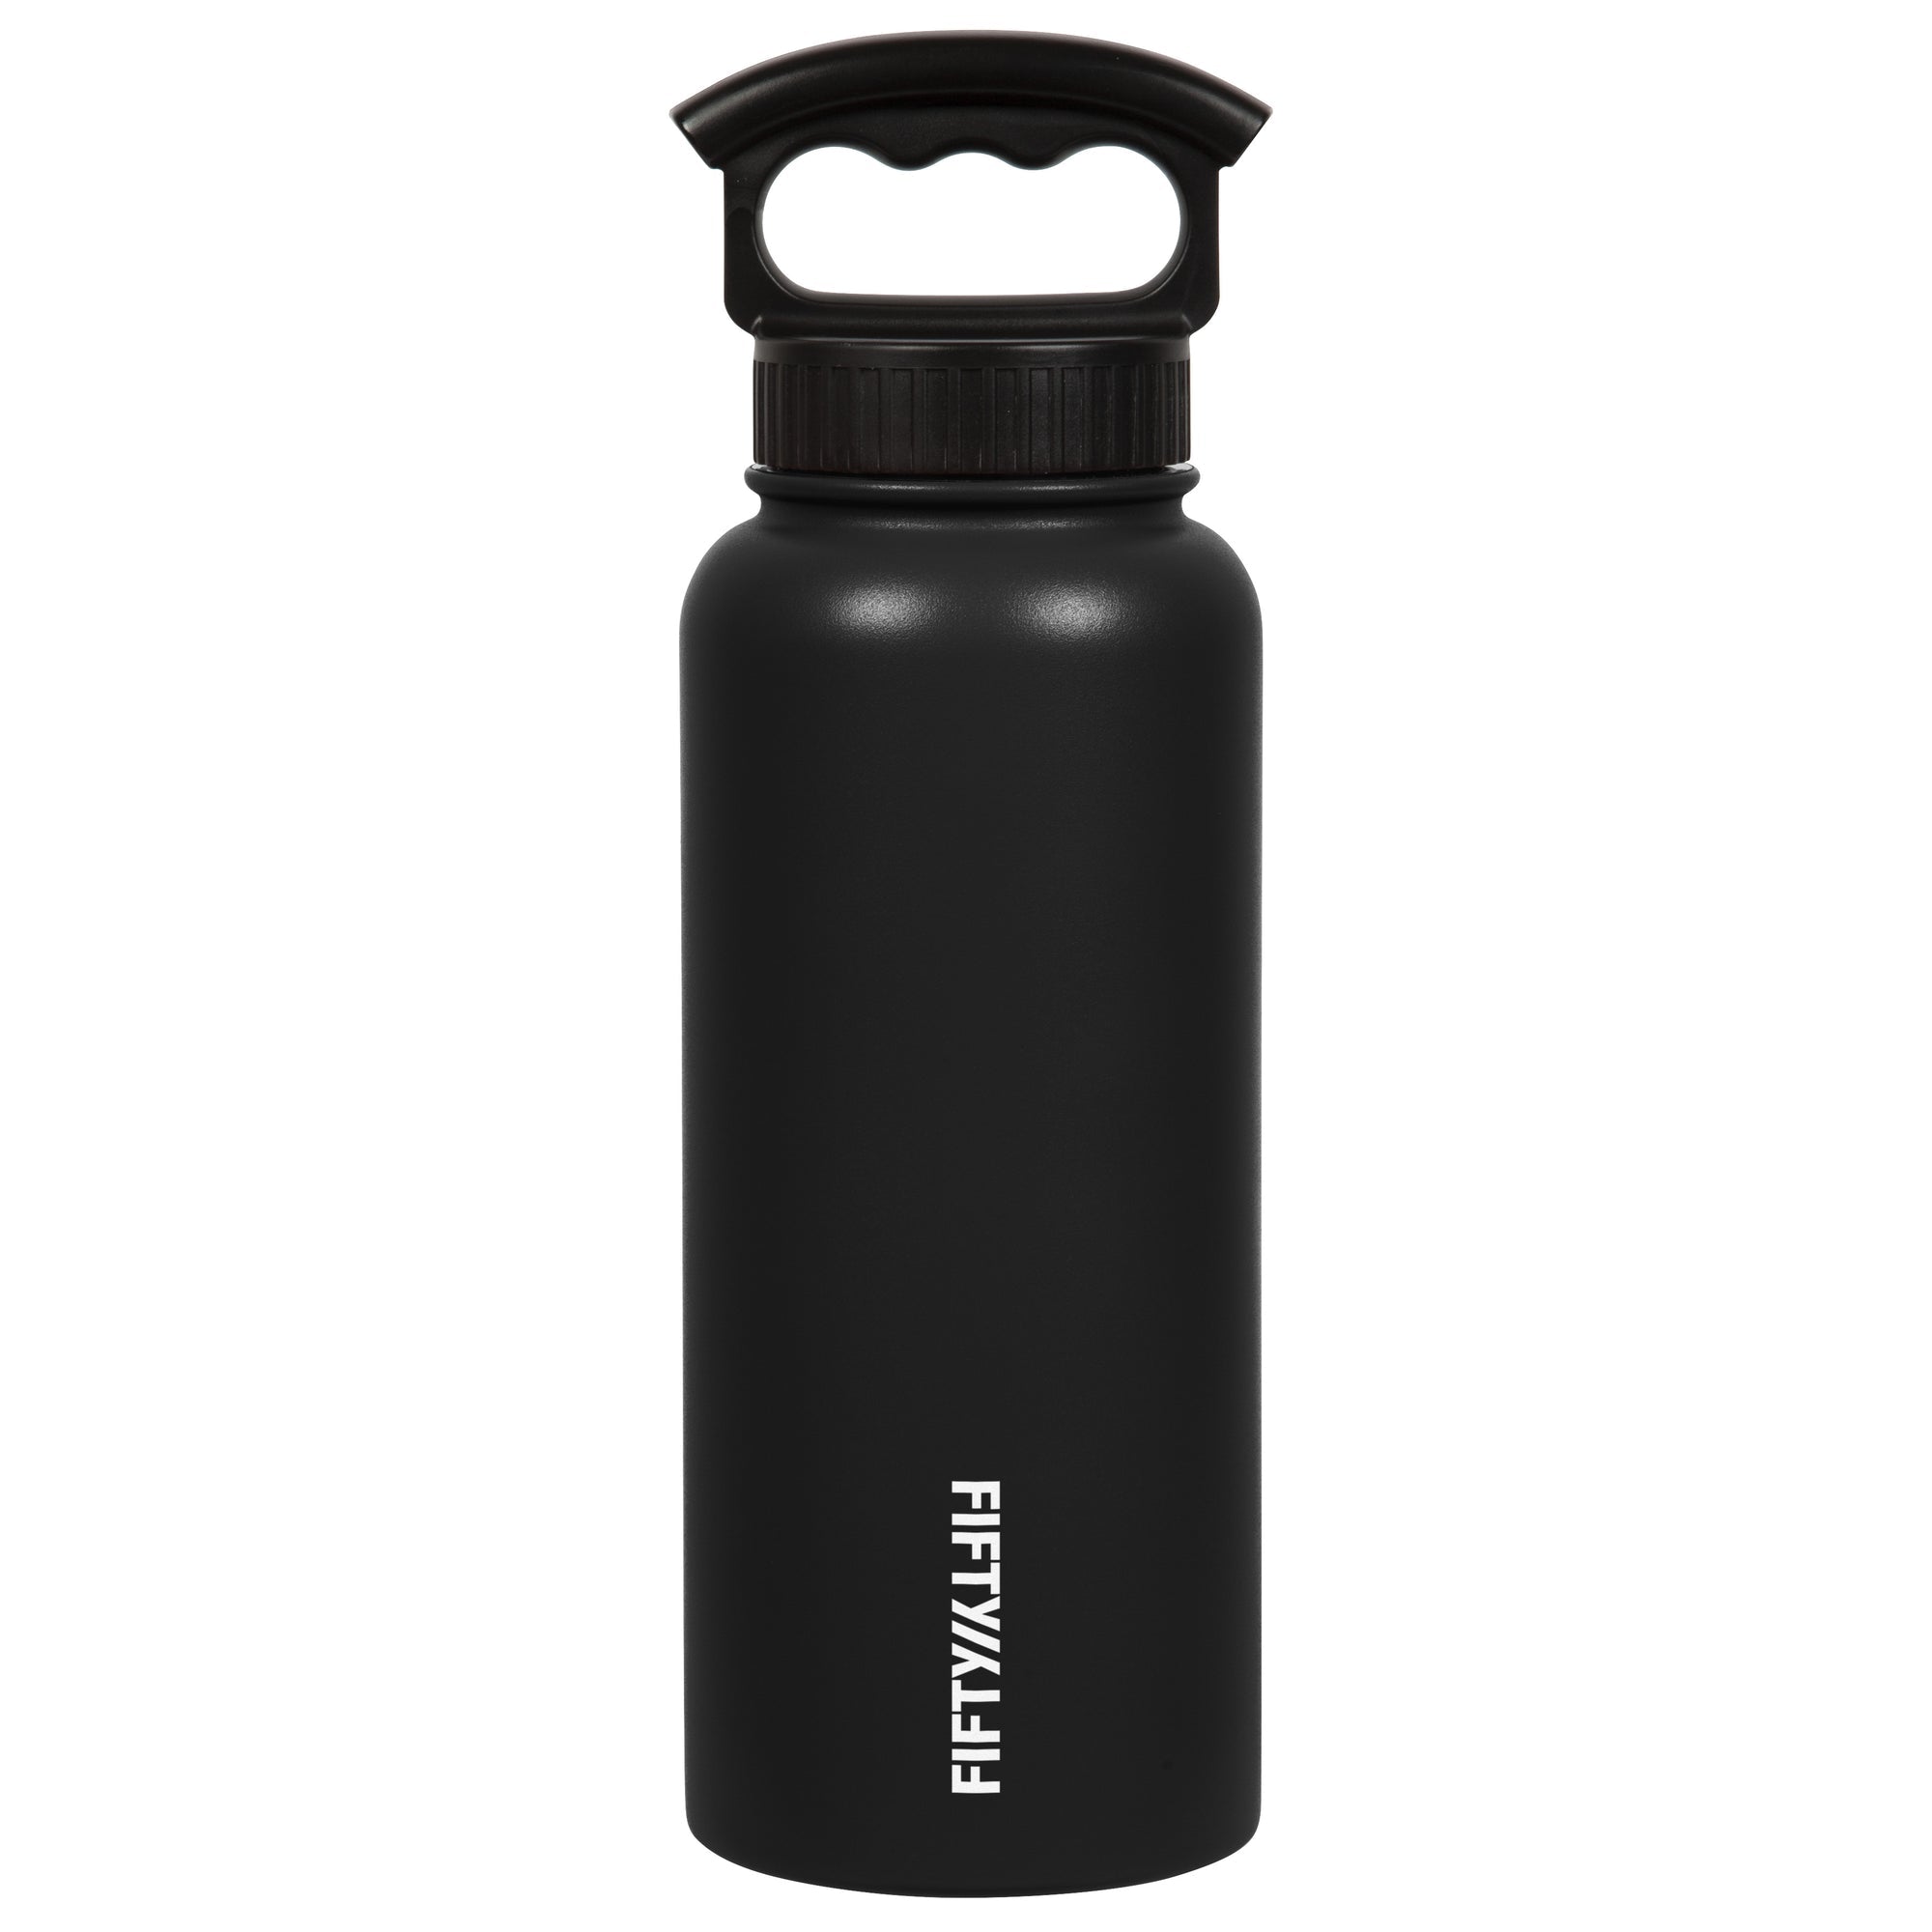 AAA.com l Thermos l 1.2 L Stainless Steel Beverage Bottle